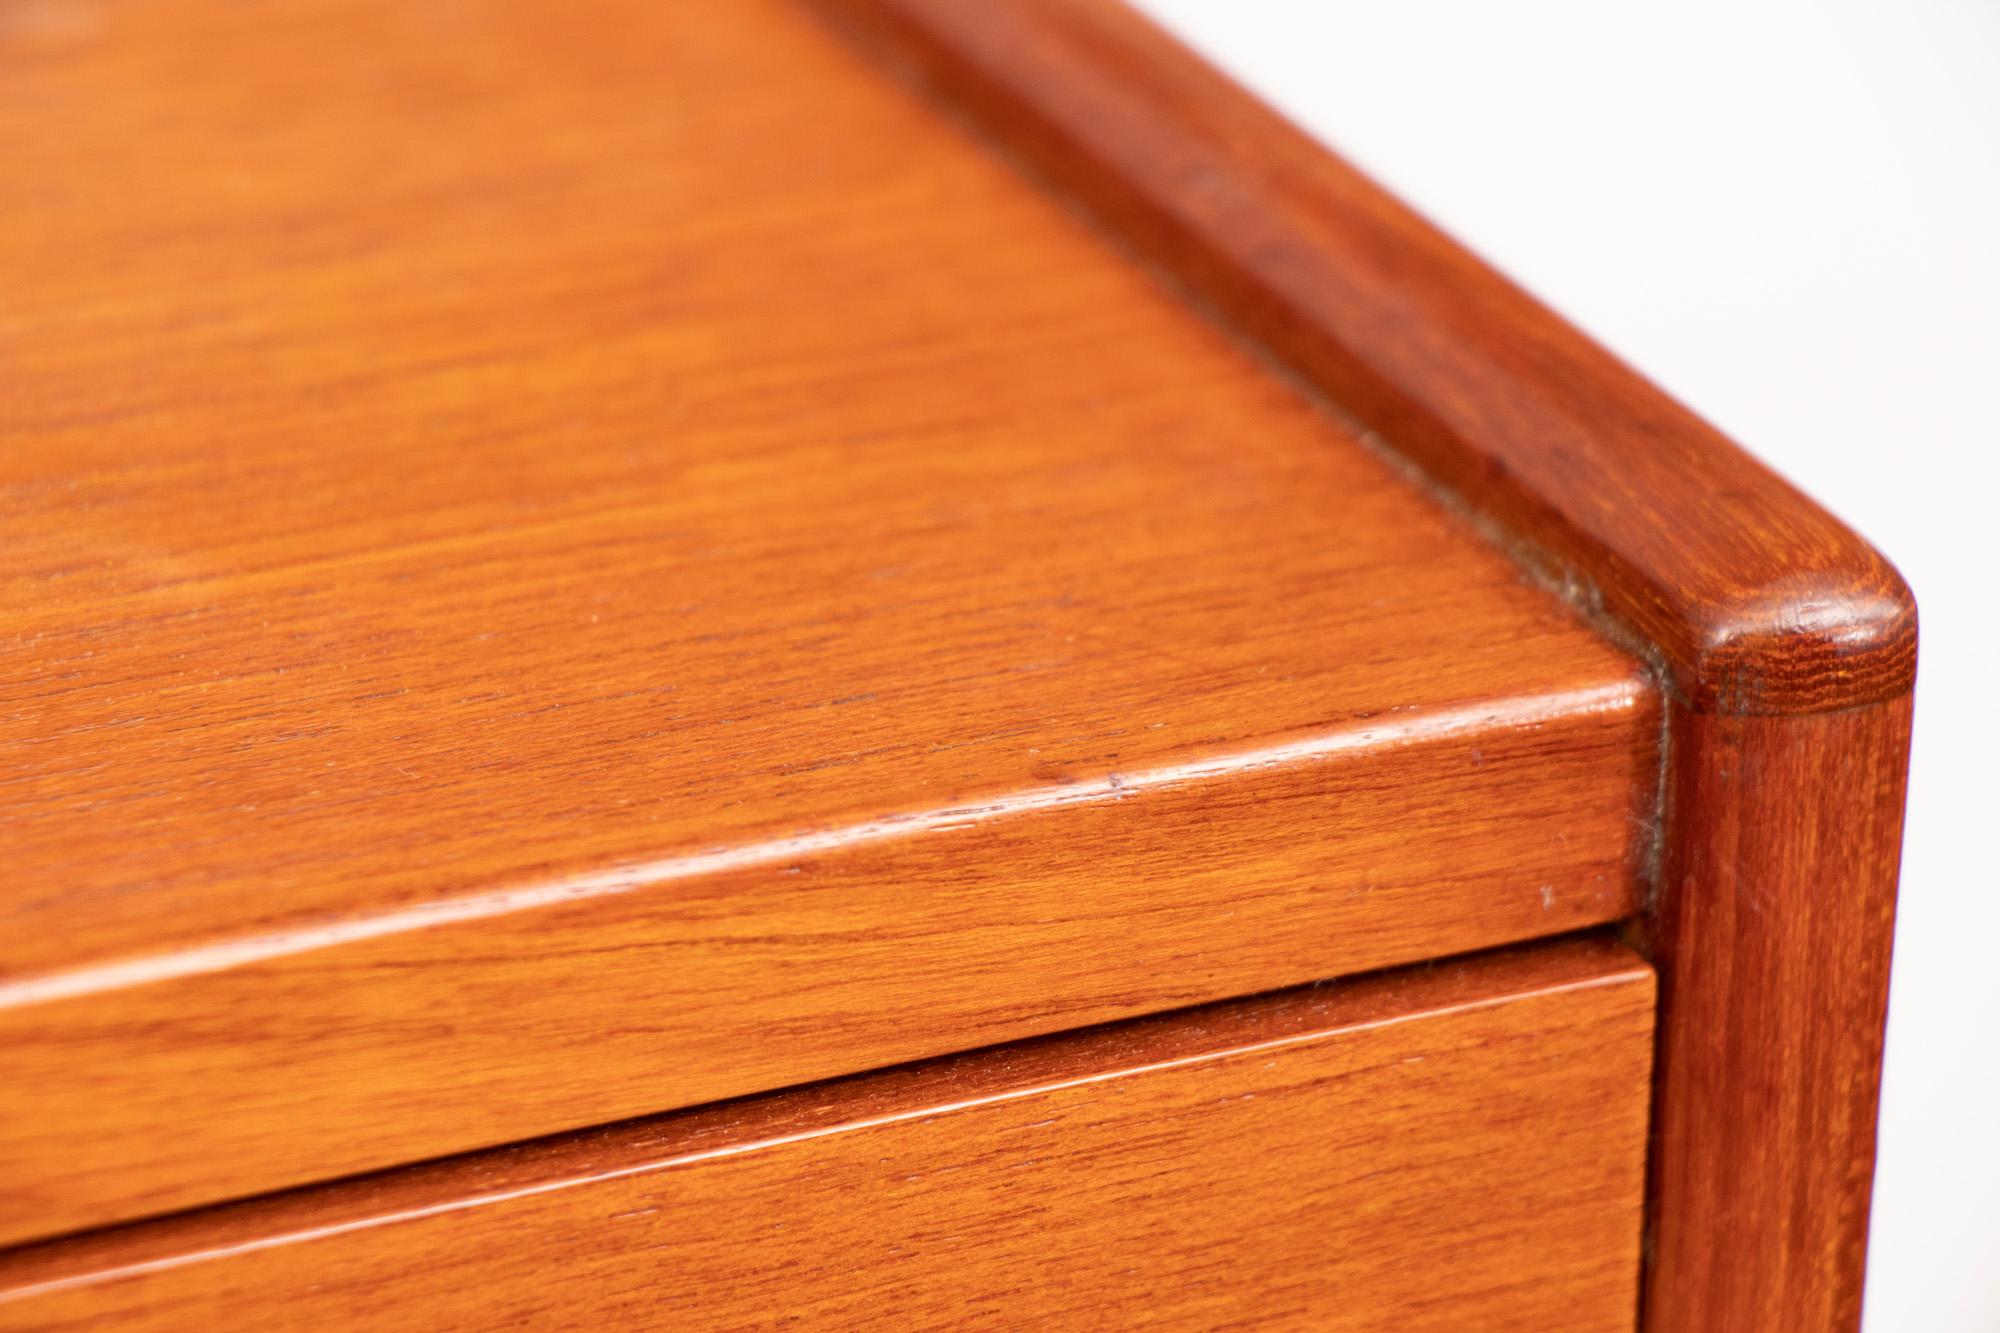 Danish Midcentury Teak Chest of Drawers by Poul Volther for Heals, circa 1960 For Sale